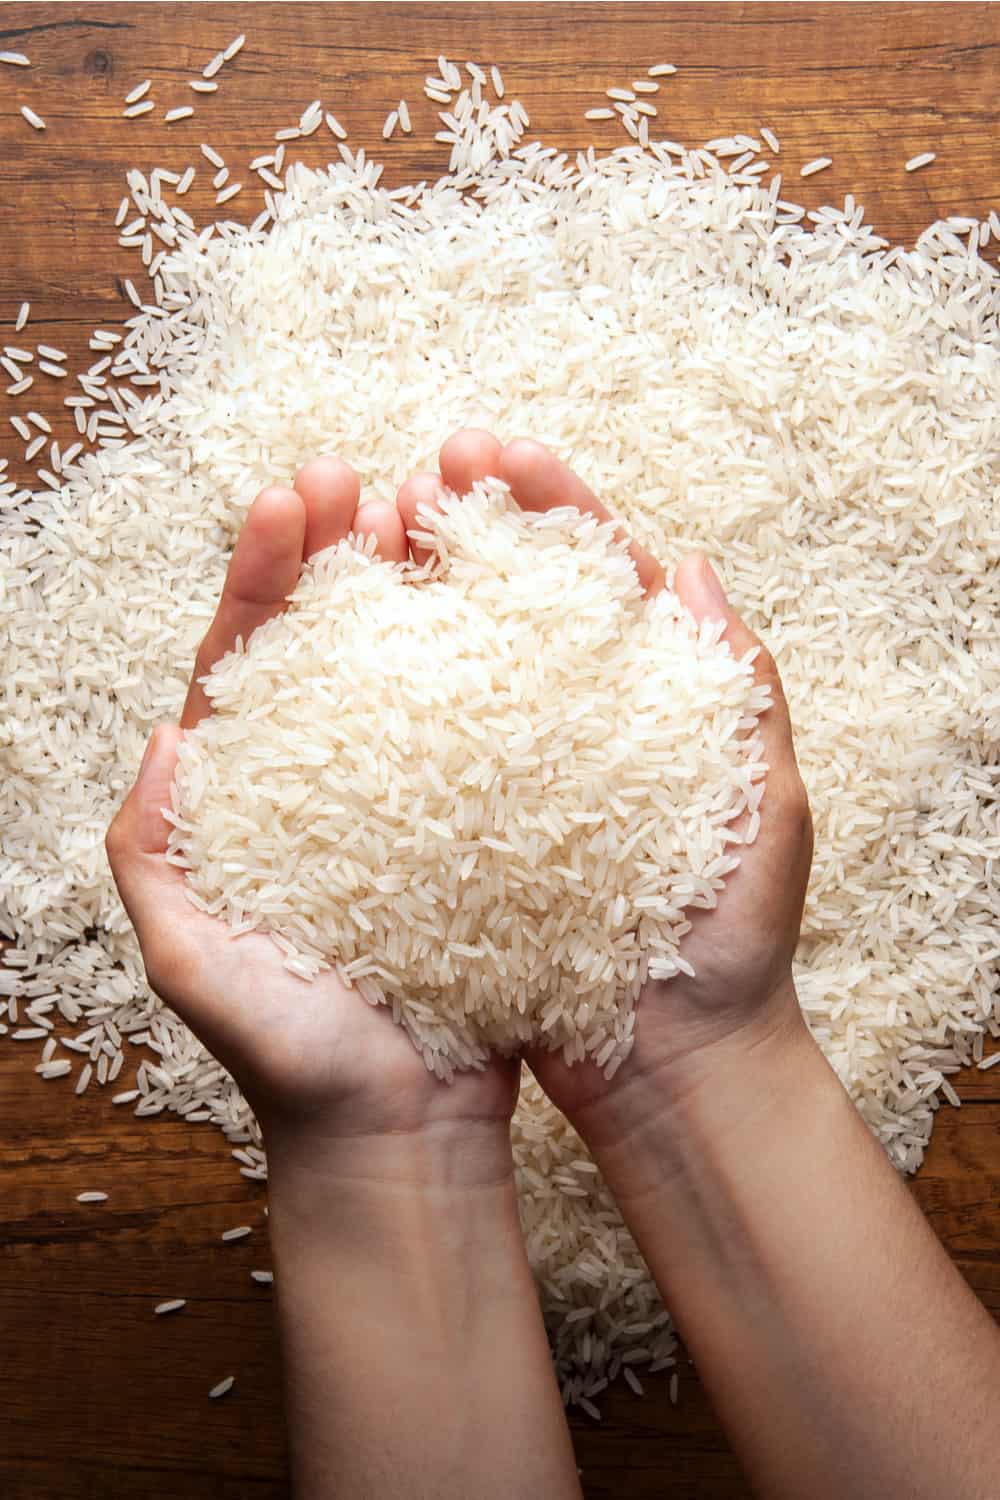 How to Tell If Rice Has Gone Bad